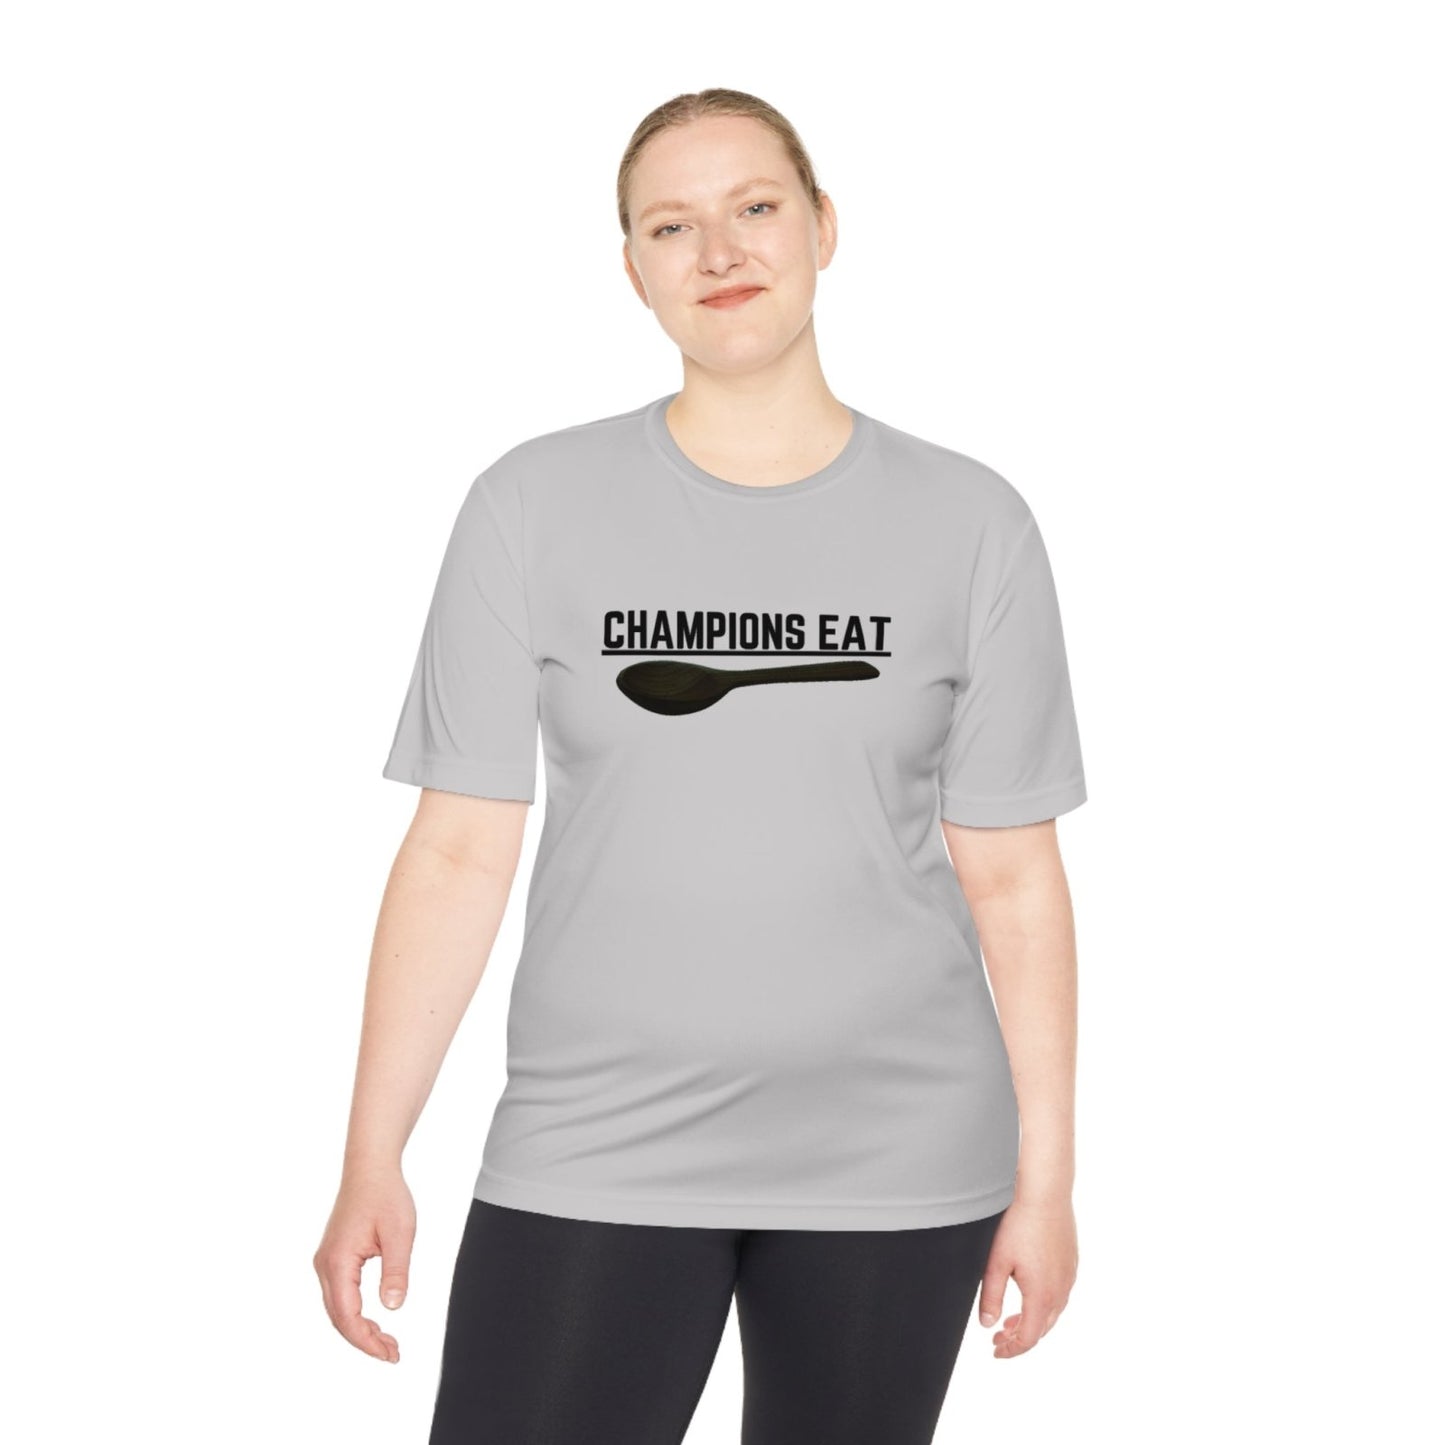 Stay Cool and Dry with our "Champion's Eat" Workout T-Shirt - Quick Dry Technology - Selden & Kingsley